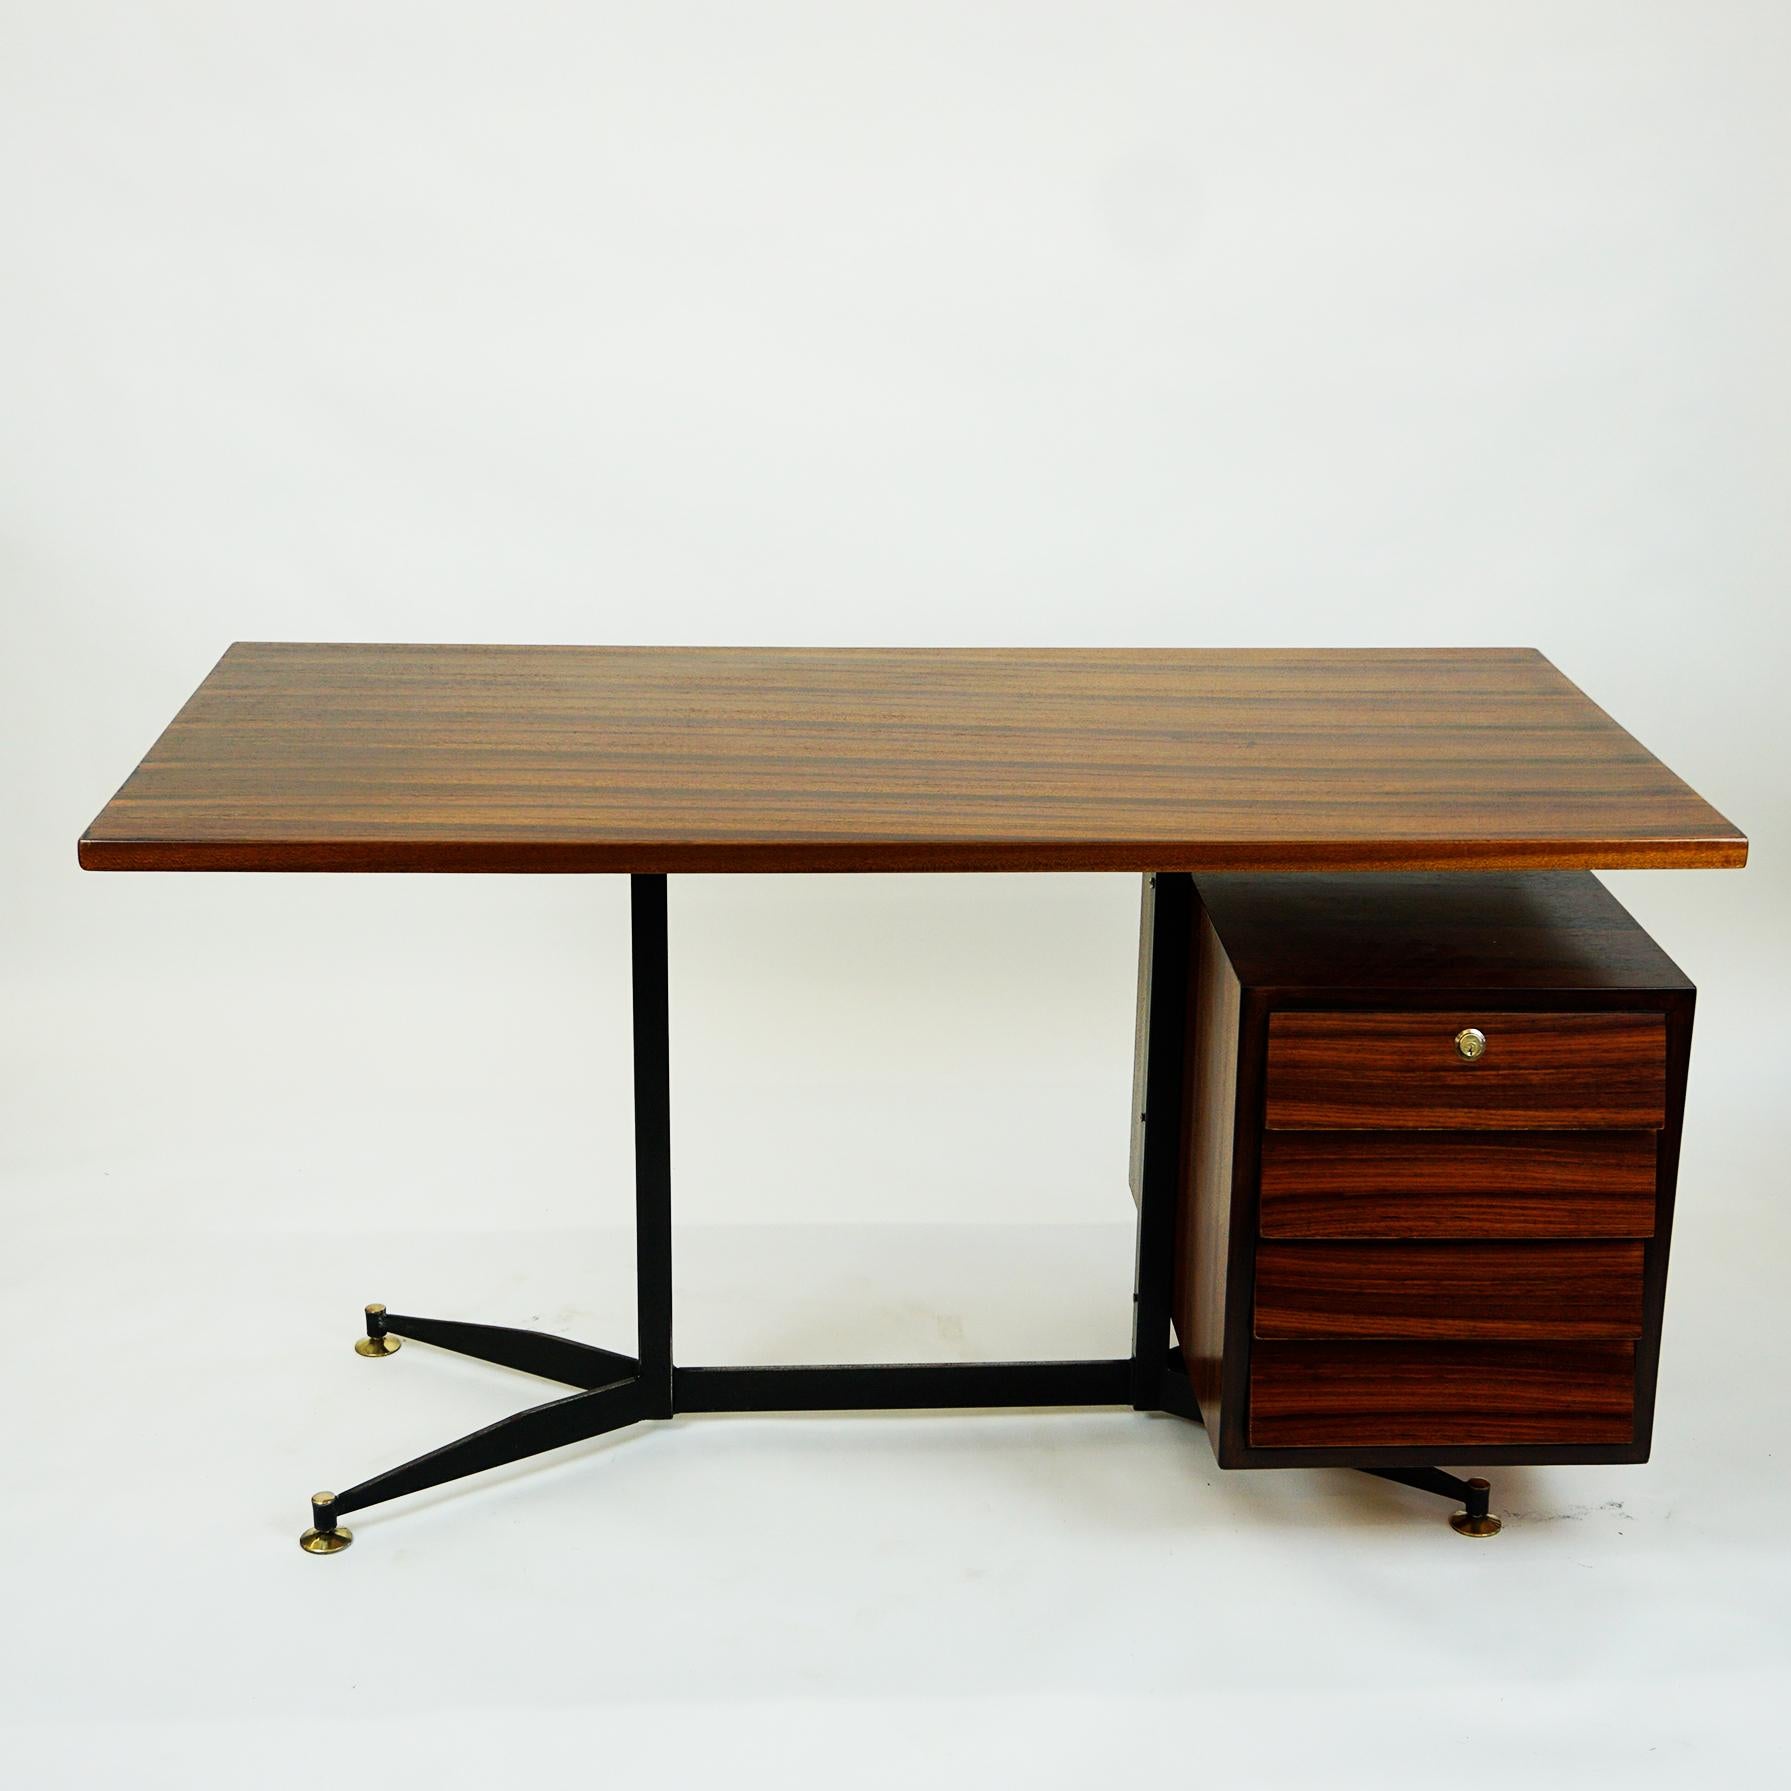 This Italian midcentury rosewood desk features steel construction with brass details, floating top design, and a storage unit on the right side with four drawers for plenty of storage. The Design of the steel base with the brass feet is very close